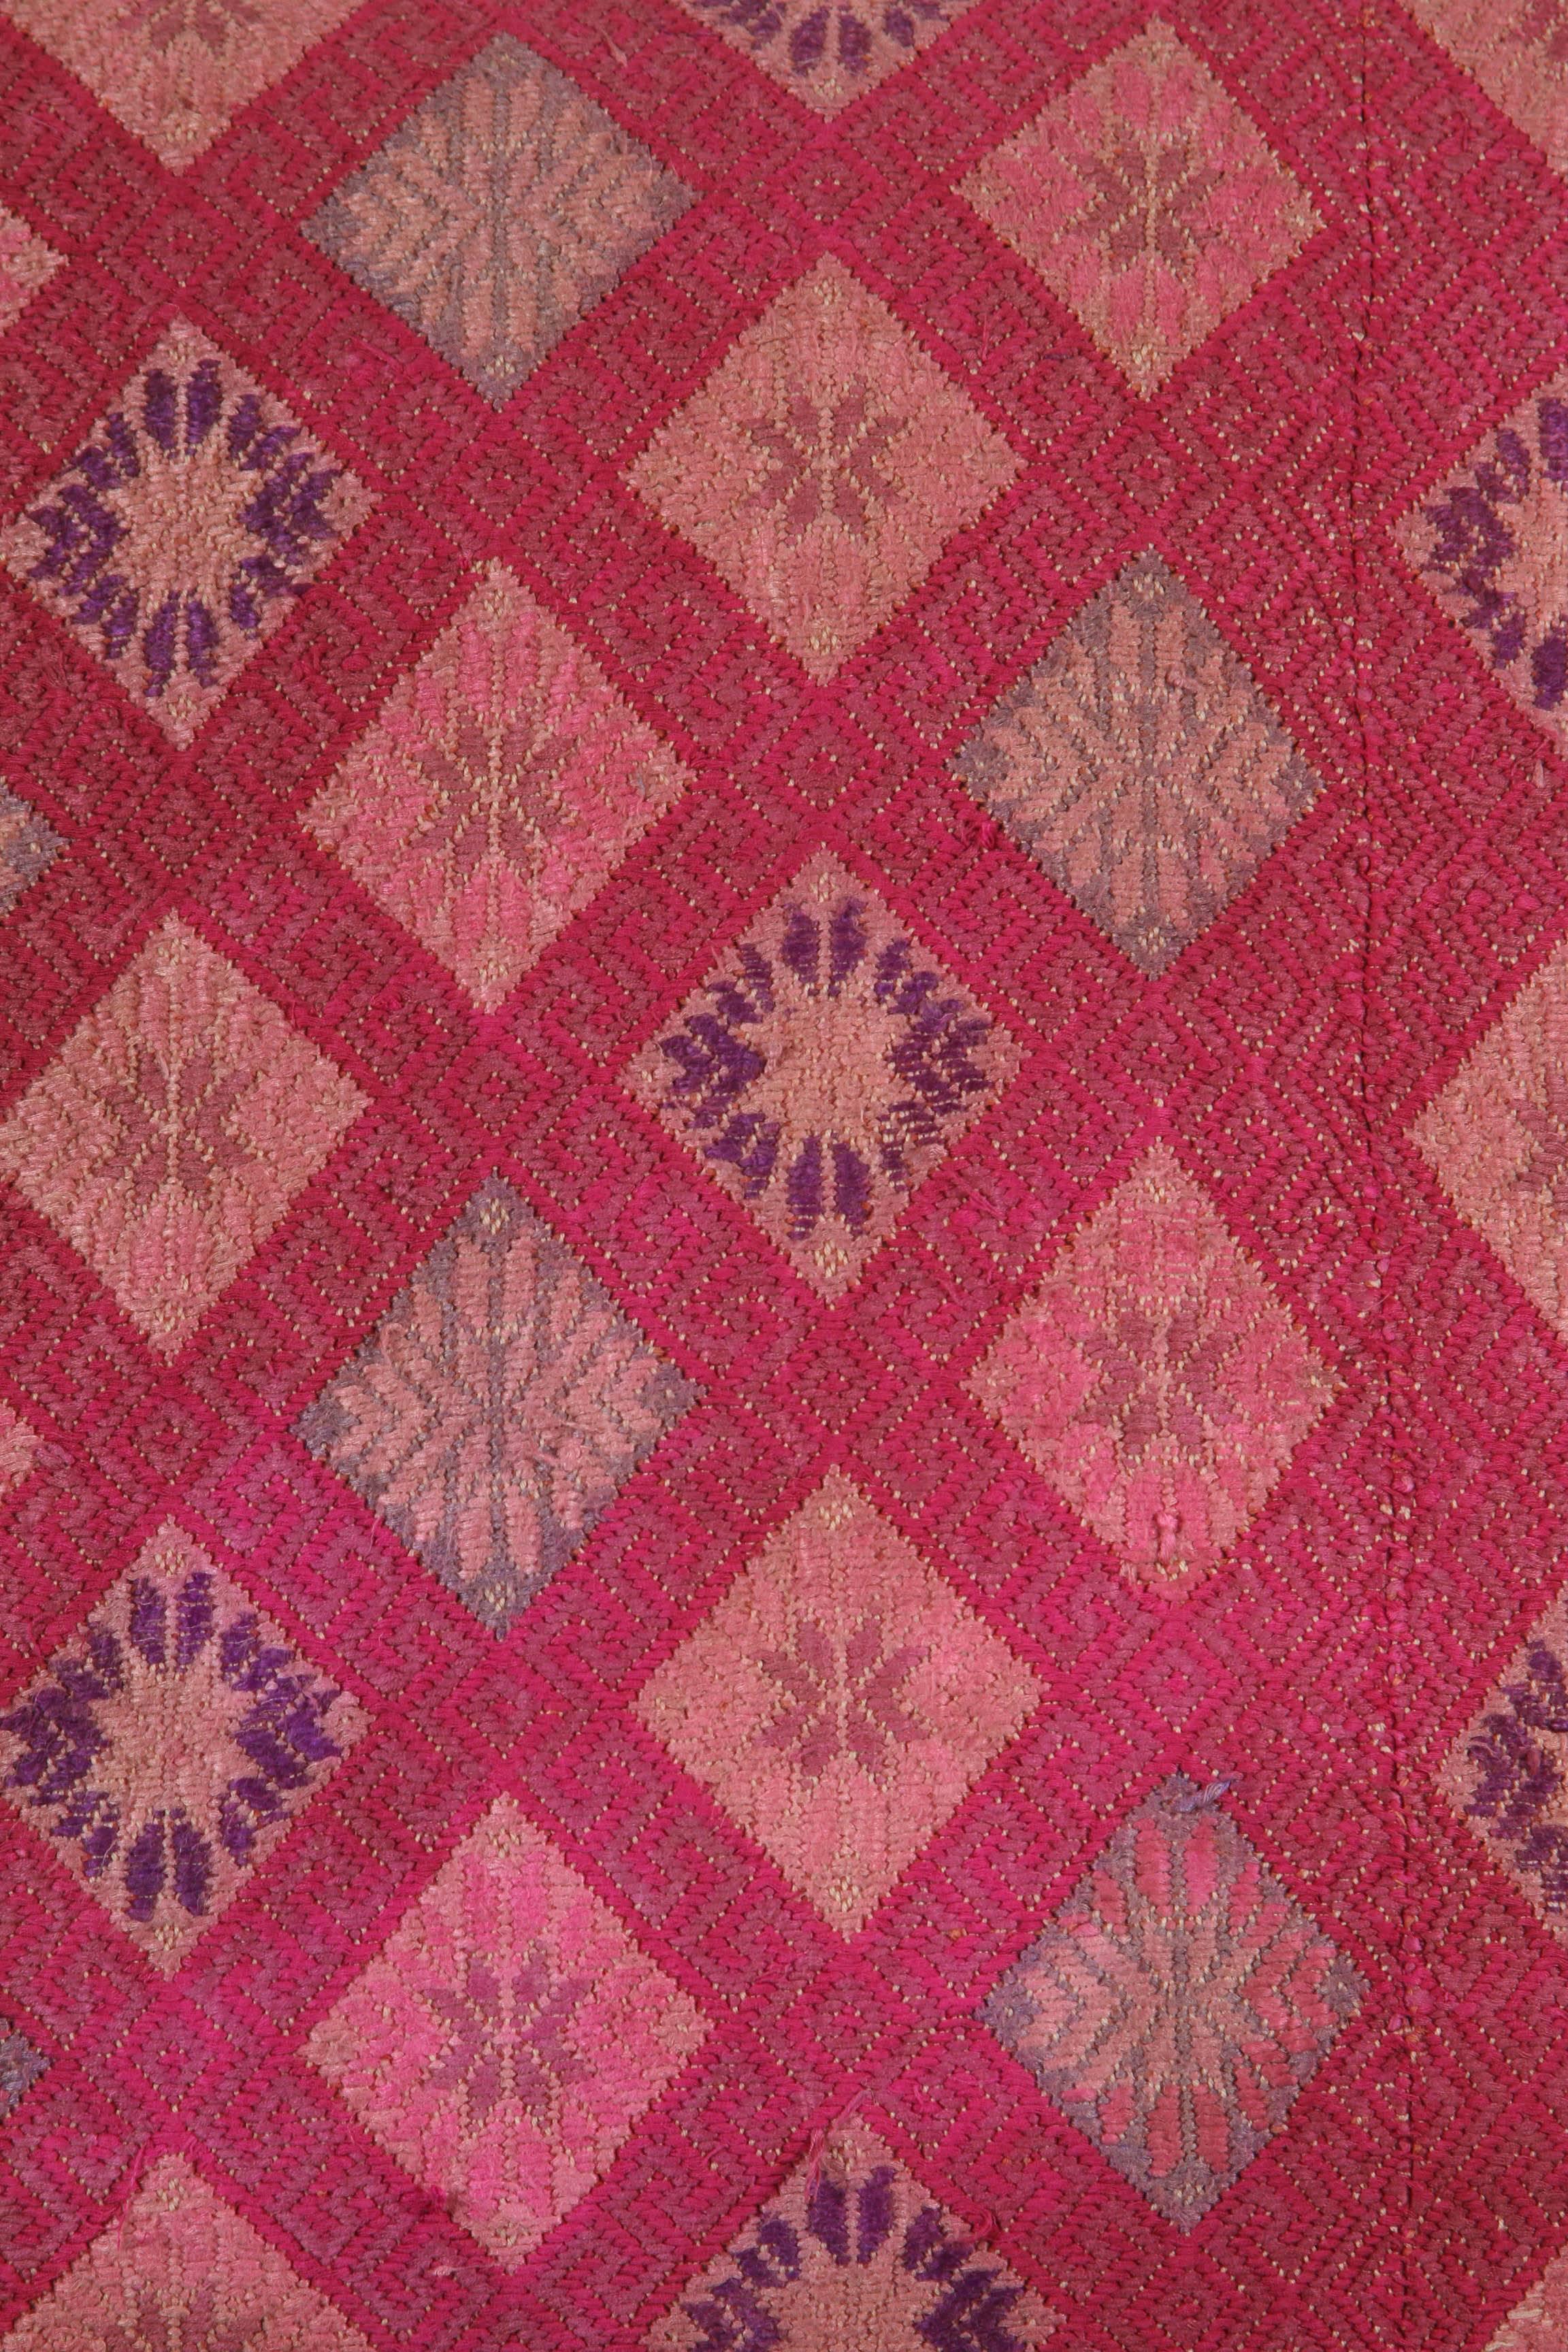 Hand loomed cotton on cotton brocade “marriage quilt”.   Mhong Tribal textile.   Backed with natural linen, feather and down fill, invisible zipper.  Two available.